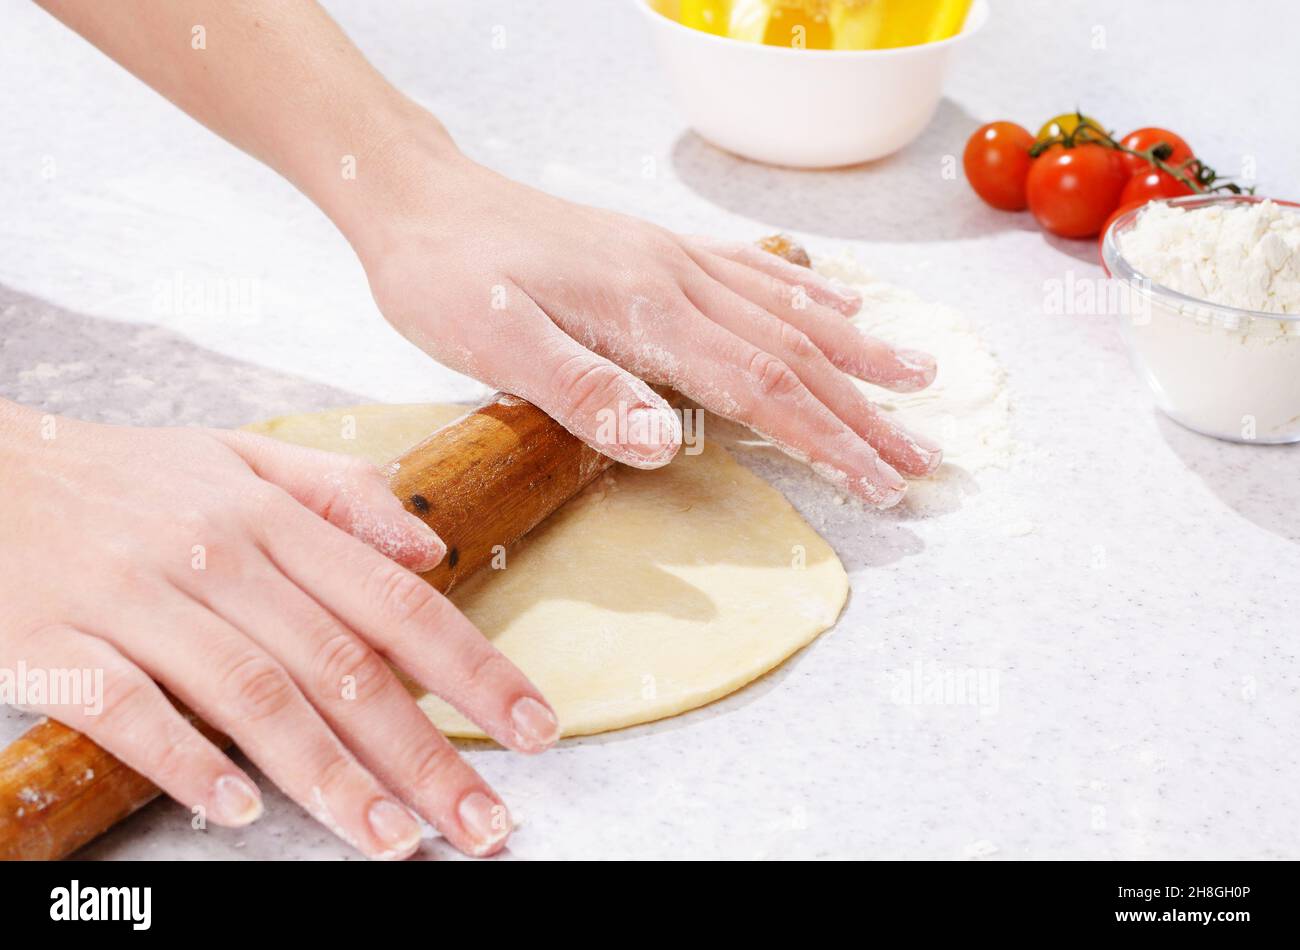 Dough preparing with wooden roller Stock Photo